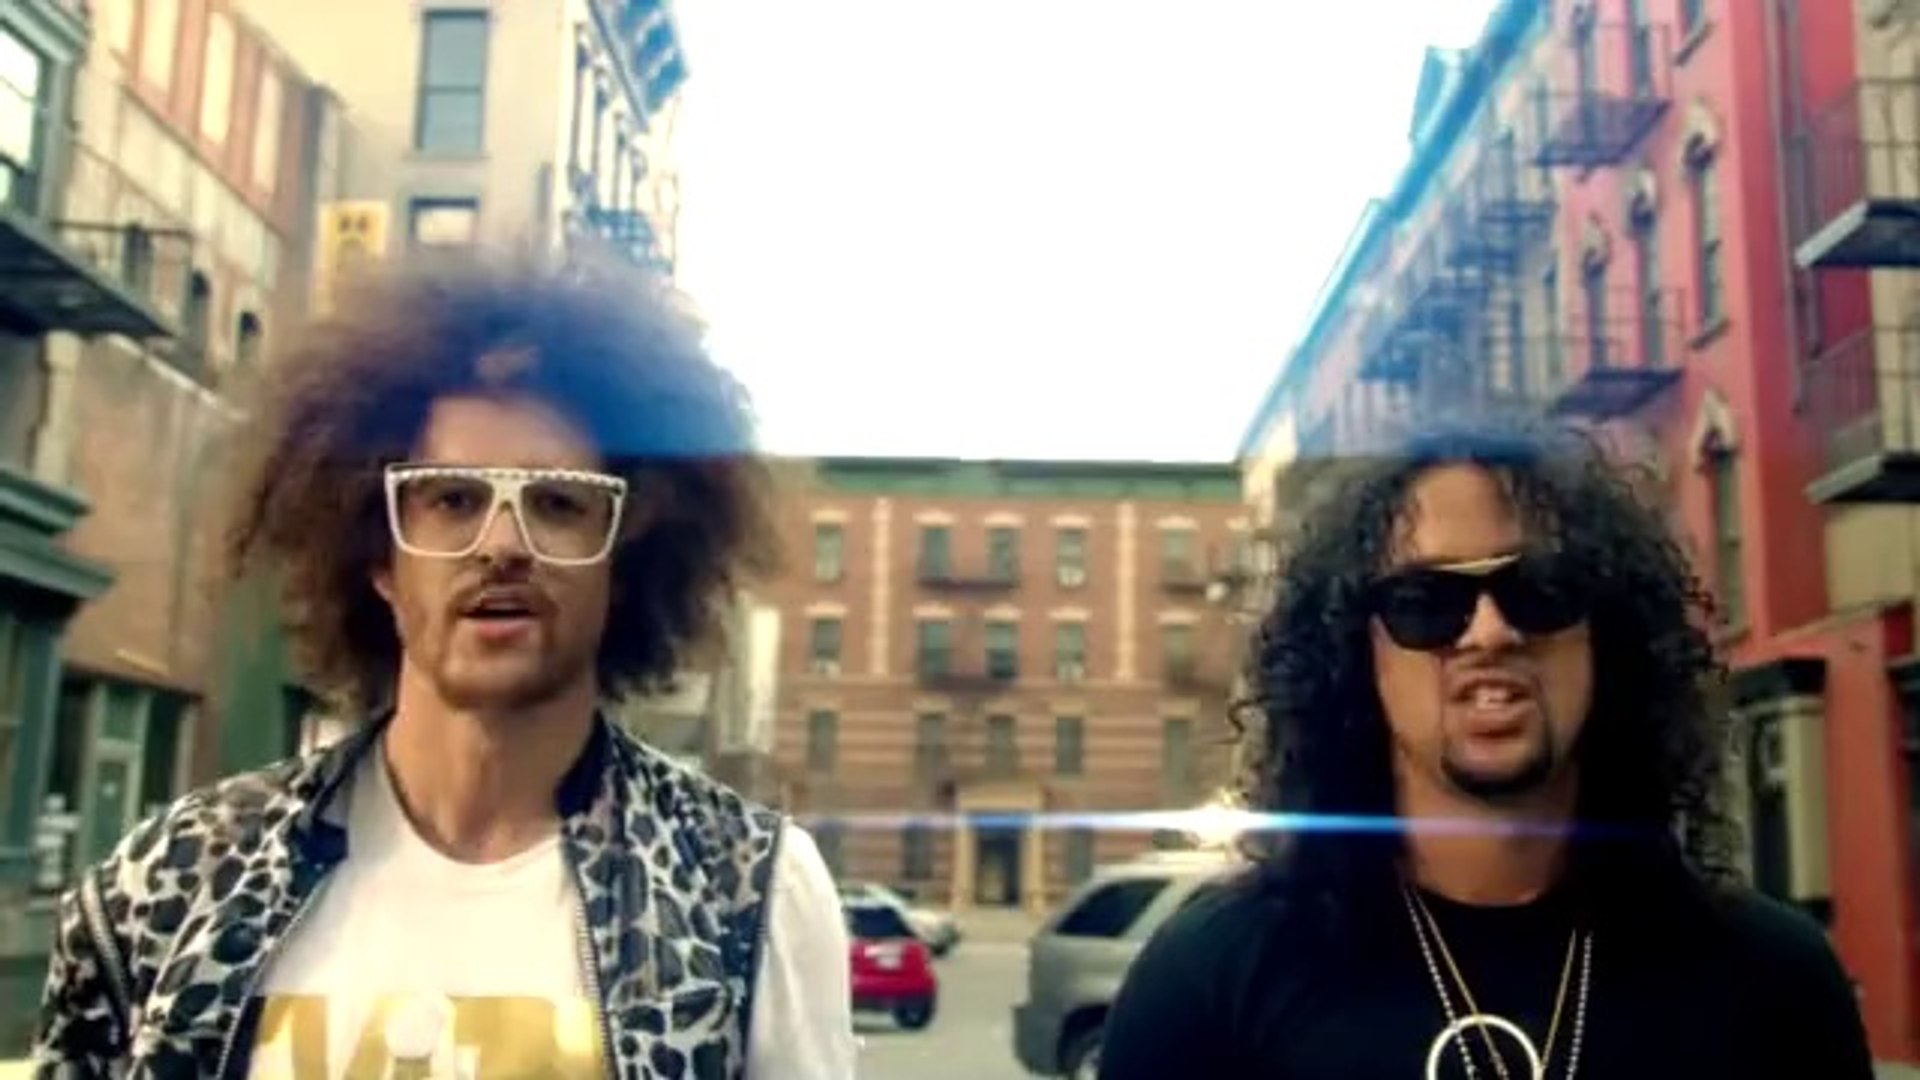 Lmfao-Party Rock anthem (Official music video) - video Dailymotion